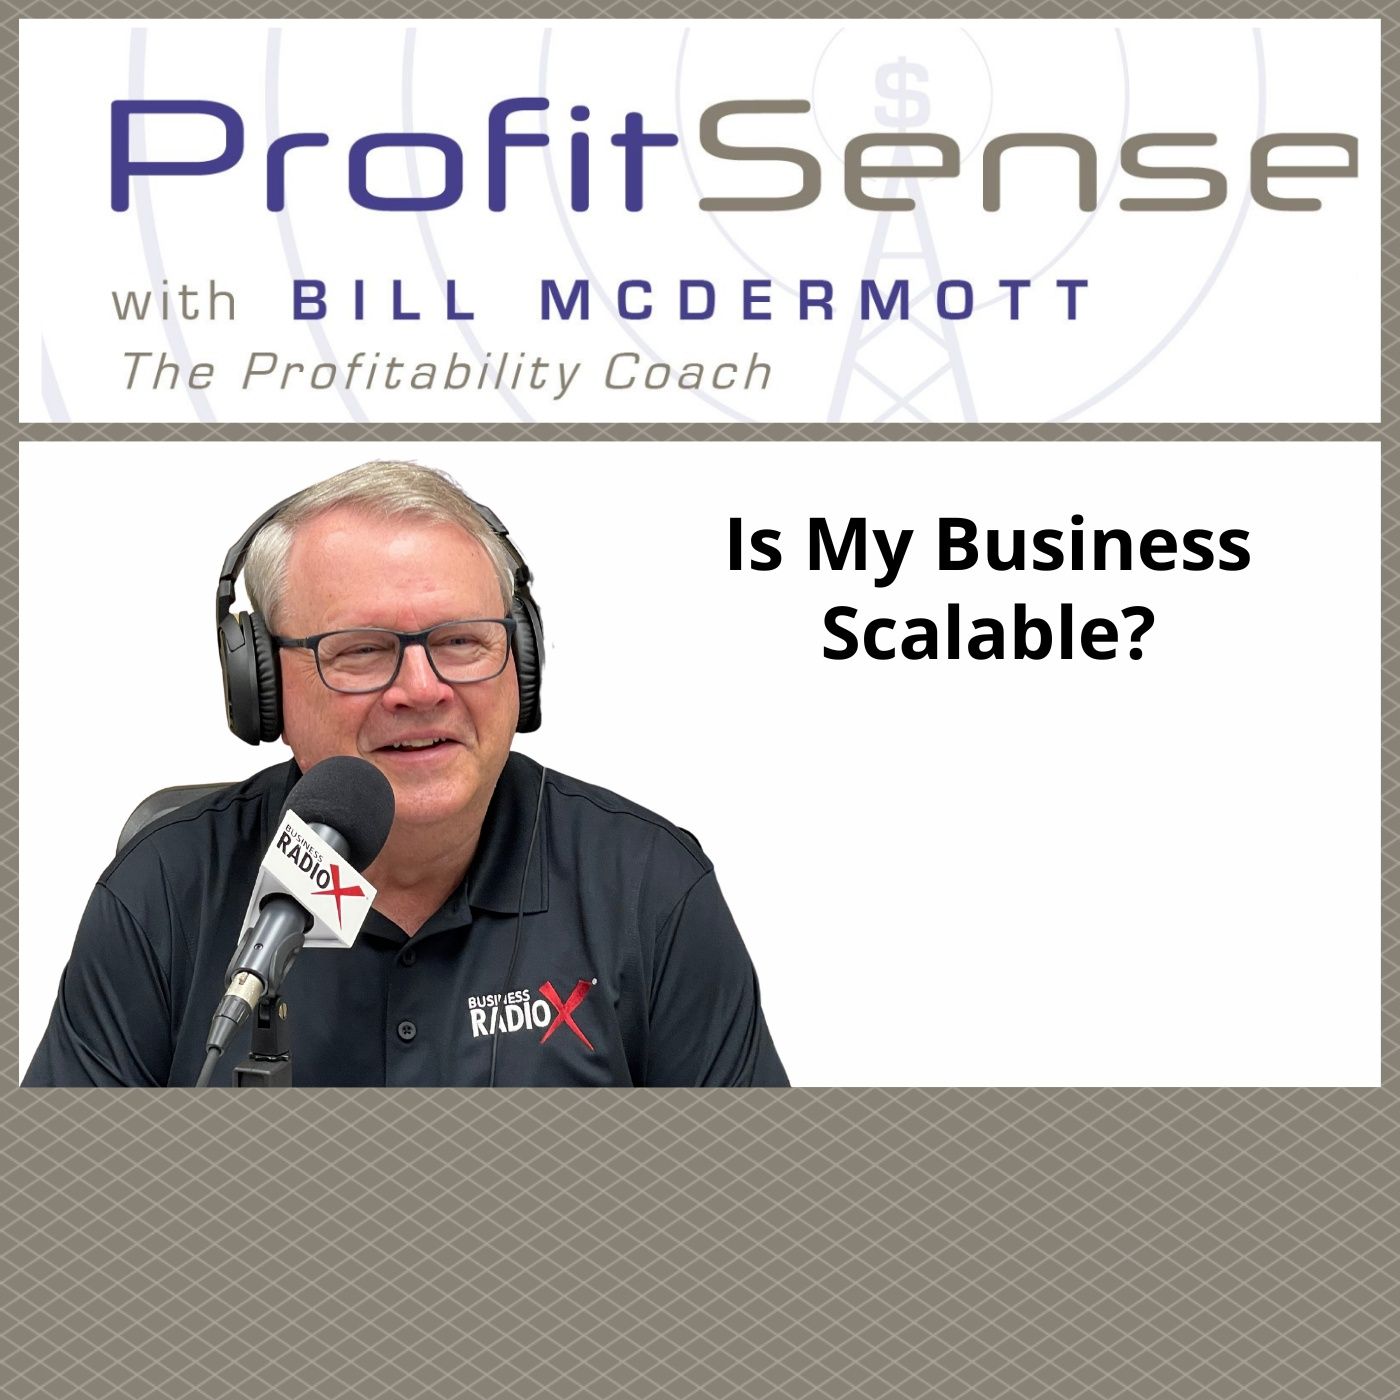 "Is My Business Scalable?" with Bill McDermott, Host of ProfitSense